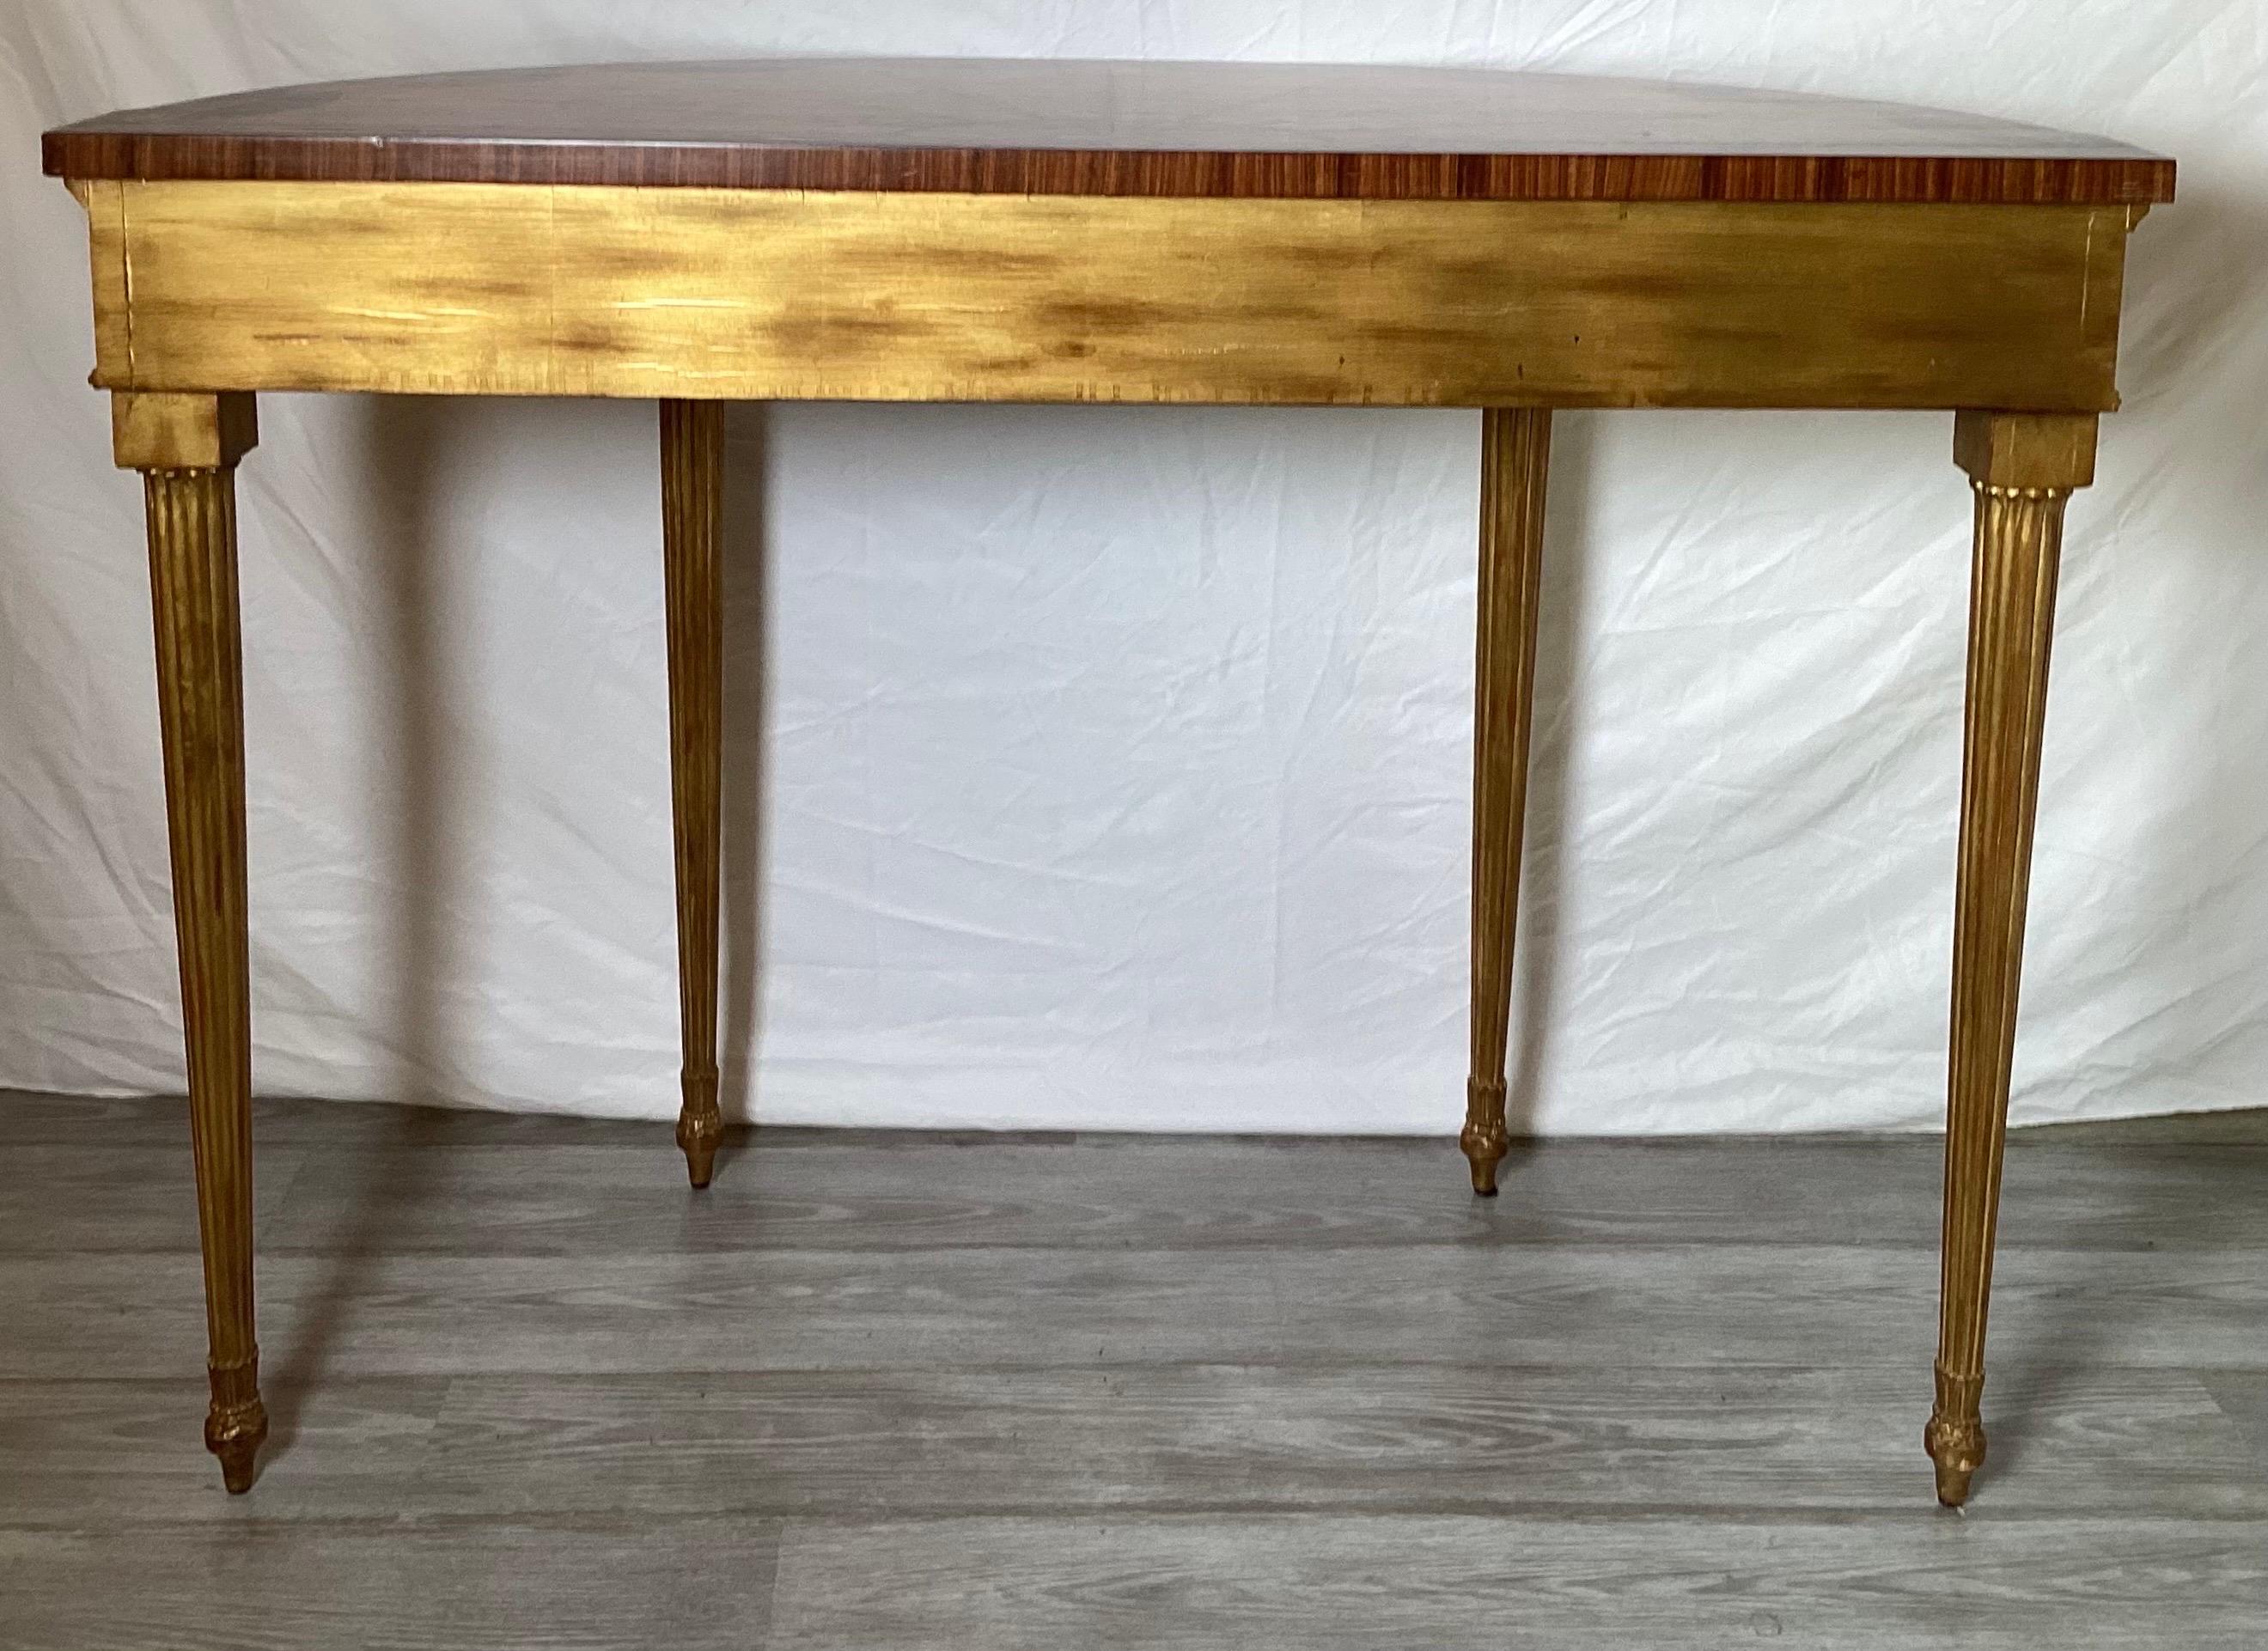 An Adam Style Giltwood Mahogany and Satinwood Demilune Console Table  For Sale 6